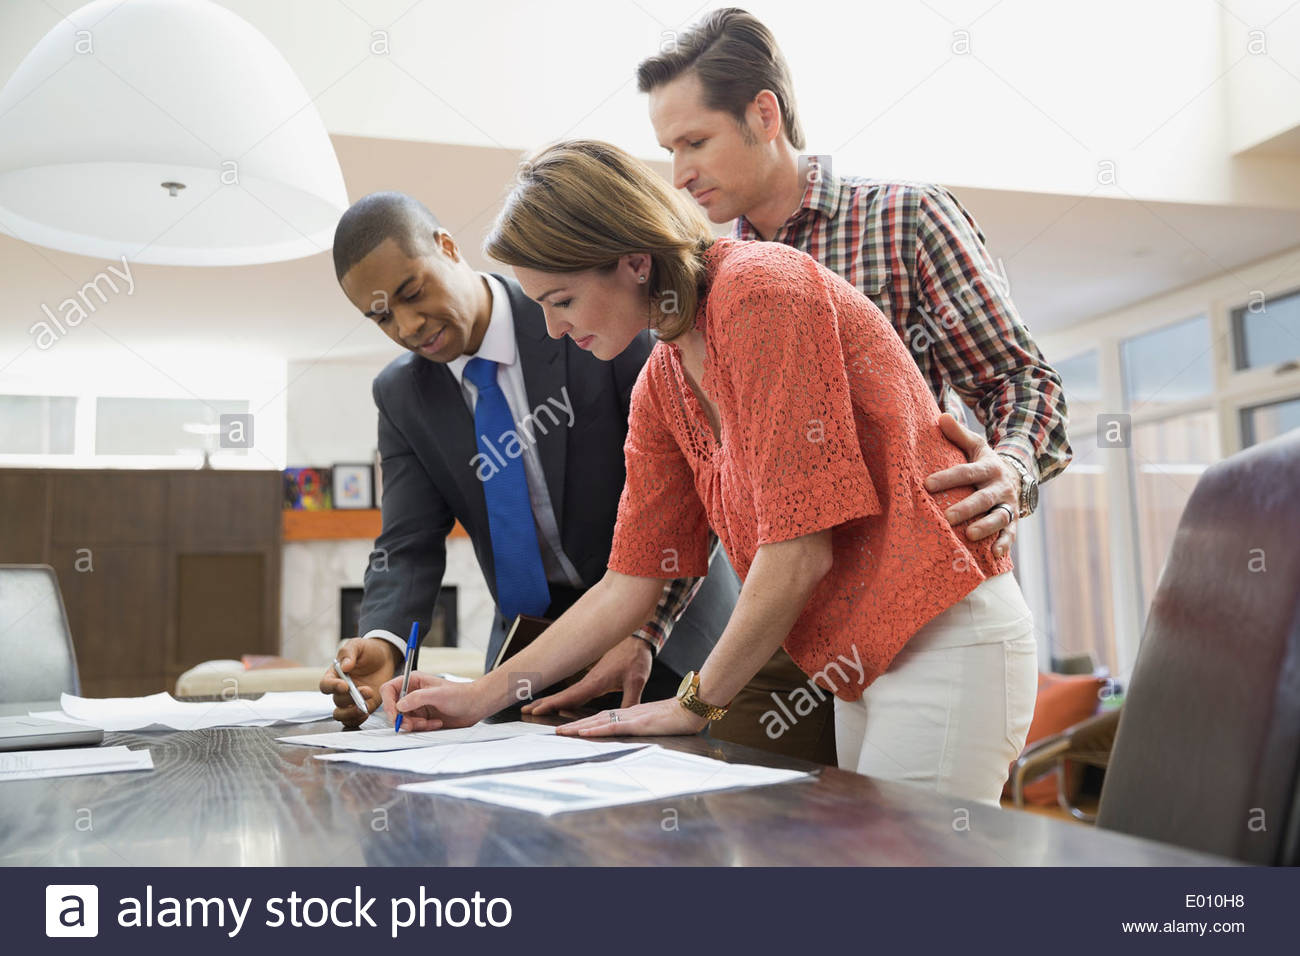 Couple signing documents for financial advisor Stock Photo